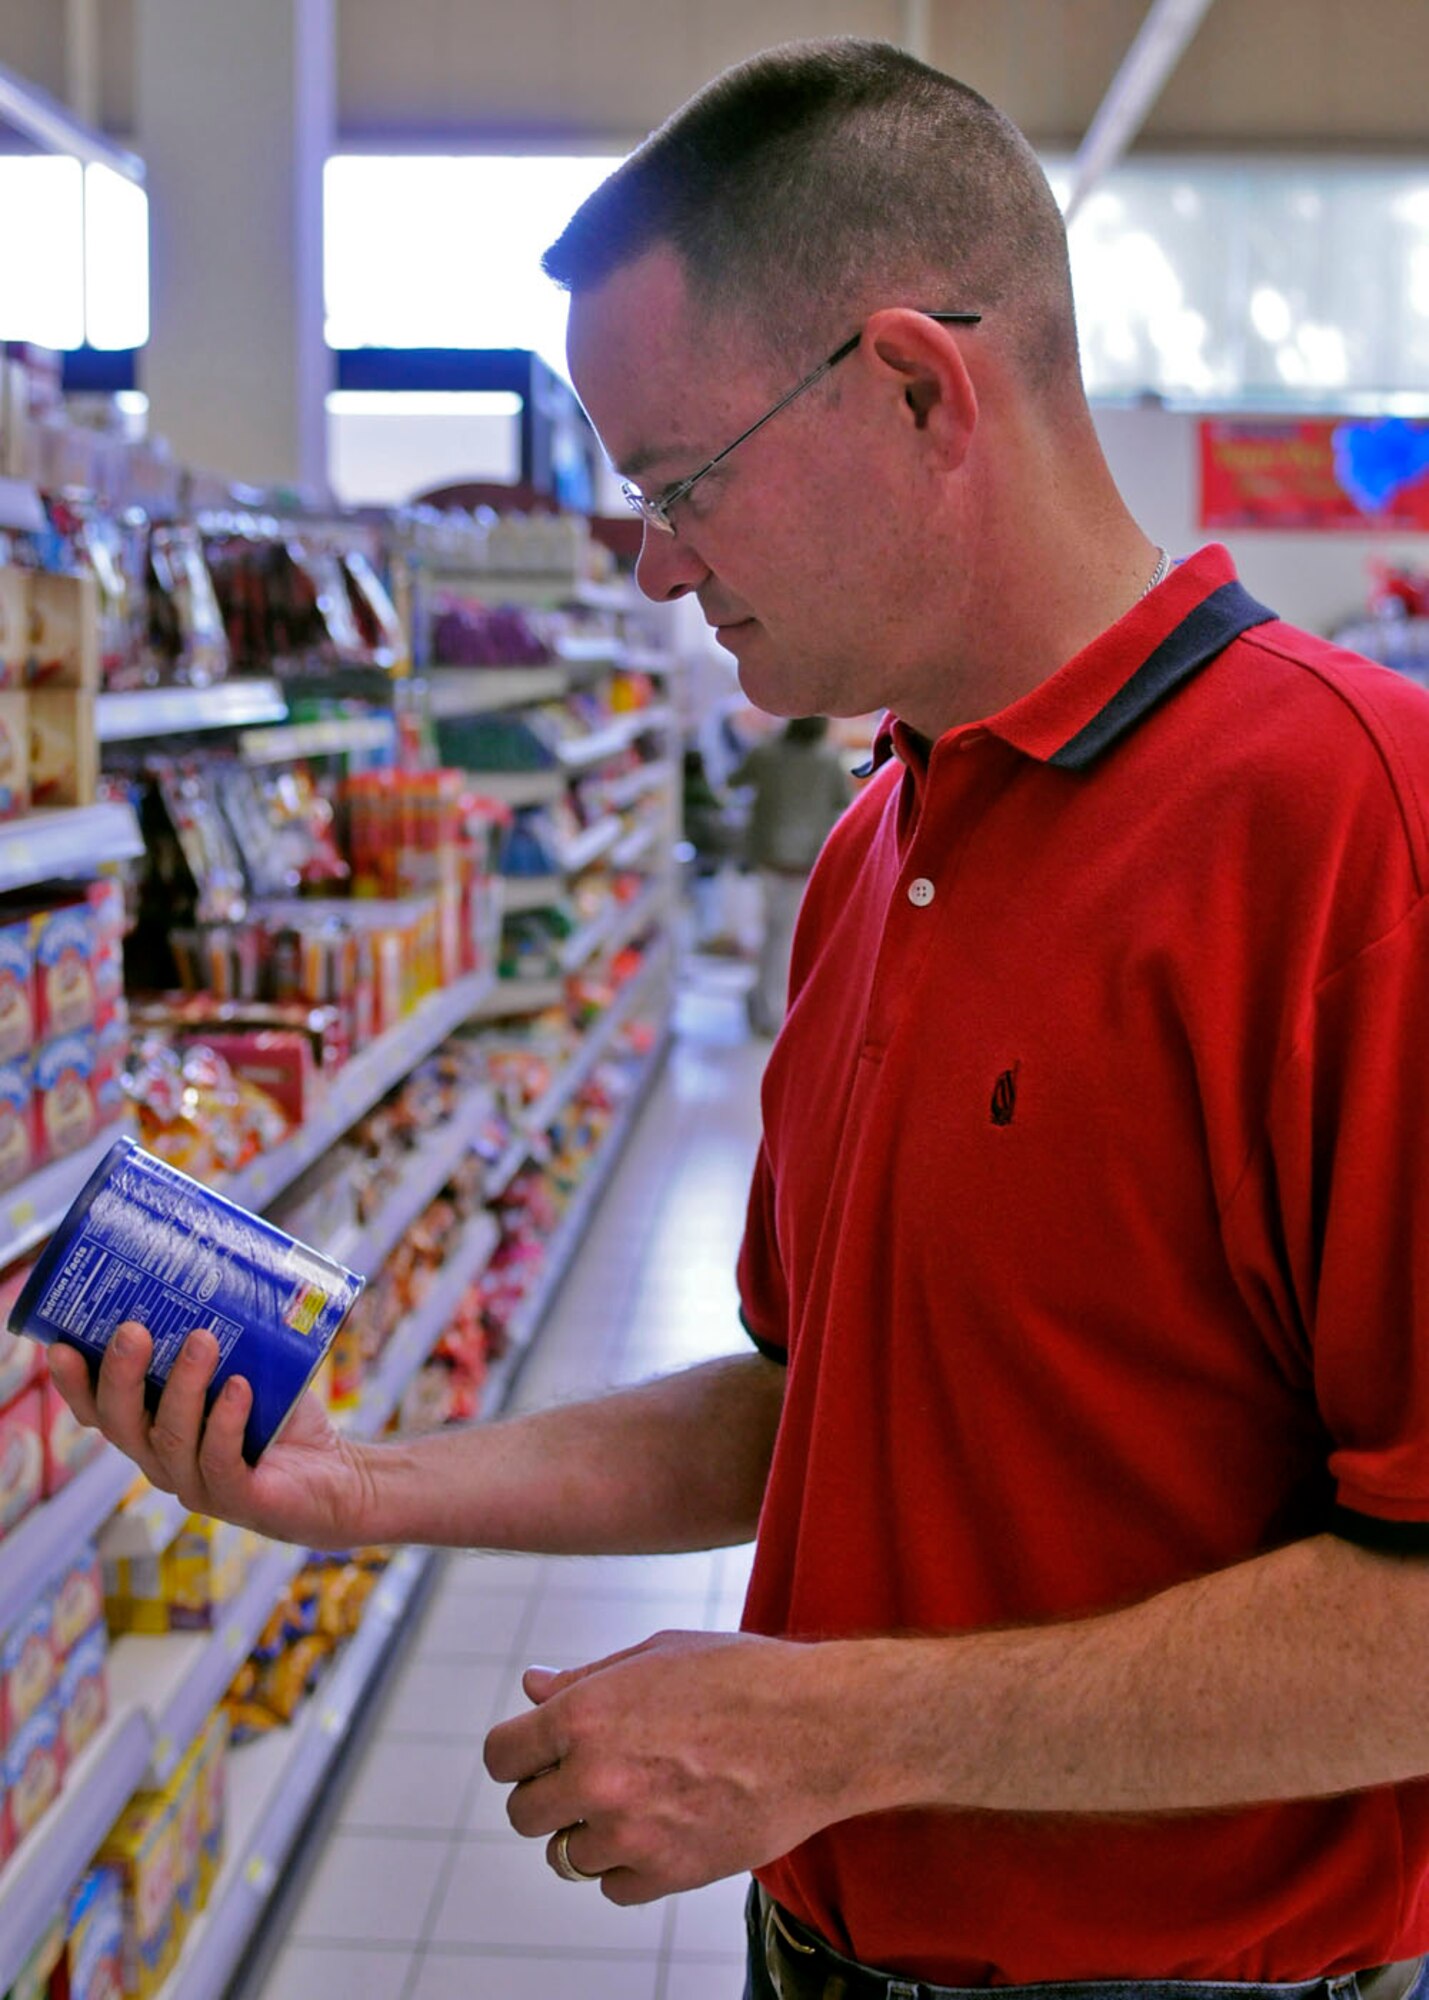 SPANGDAHLEM AIR BASE, Germany -- Lt. Col. Justin Hickman, 606th Air Control Squadron commander, inspects a product here July 9 during the commissary re-opening. A renovation project expanded the floor size by 11,000 square feet, added 2,500 new items to the shelf inventory and created more space for shoppers. (U.S. Air Force photo / Senior Airman Daryl Knee)